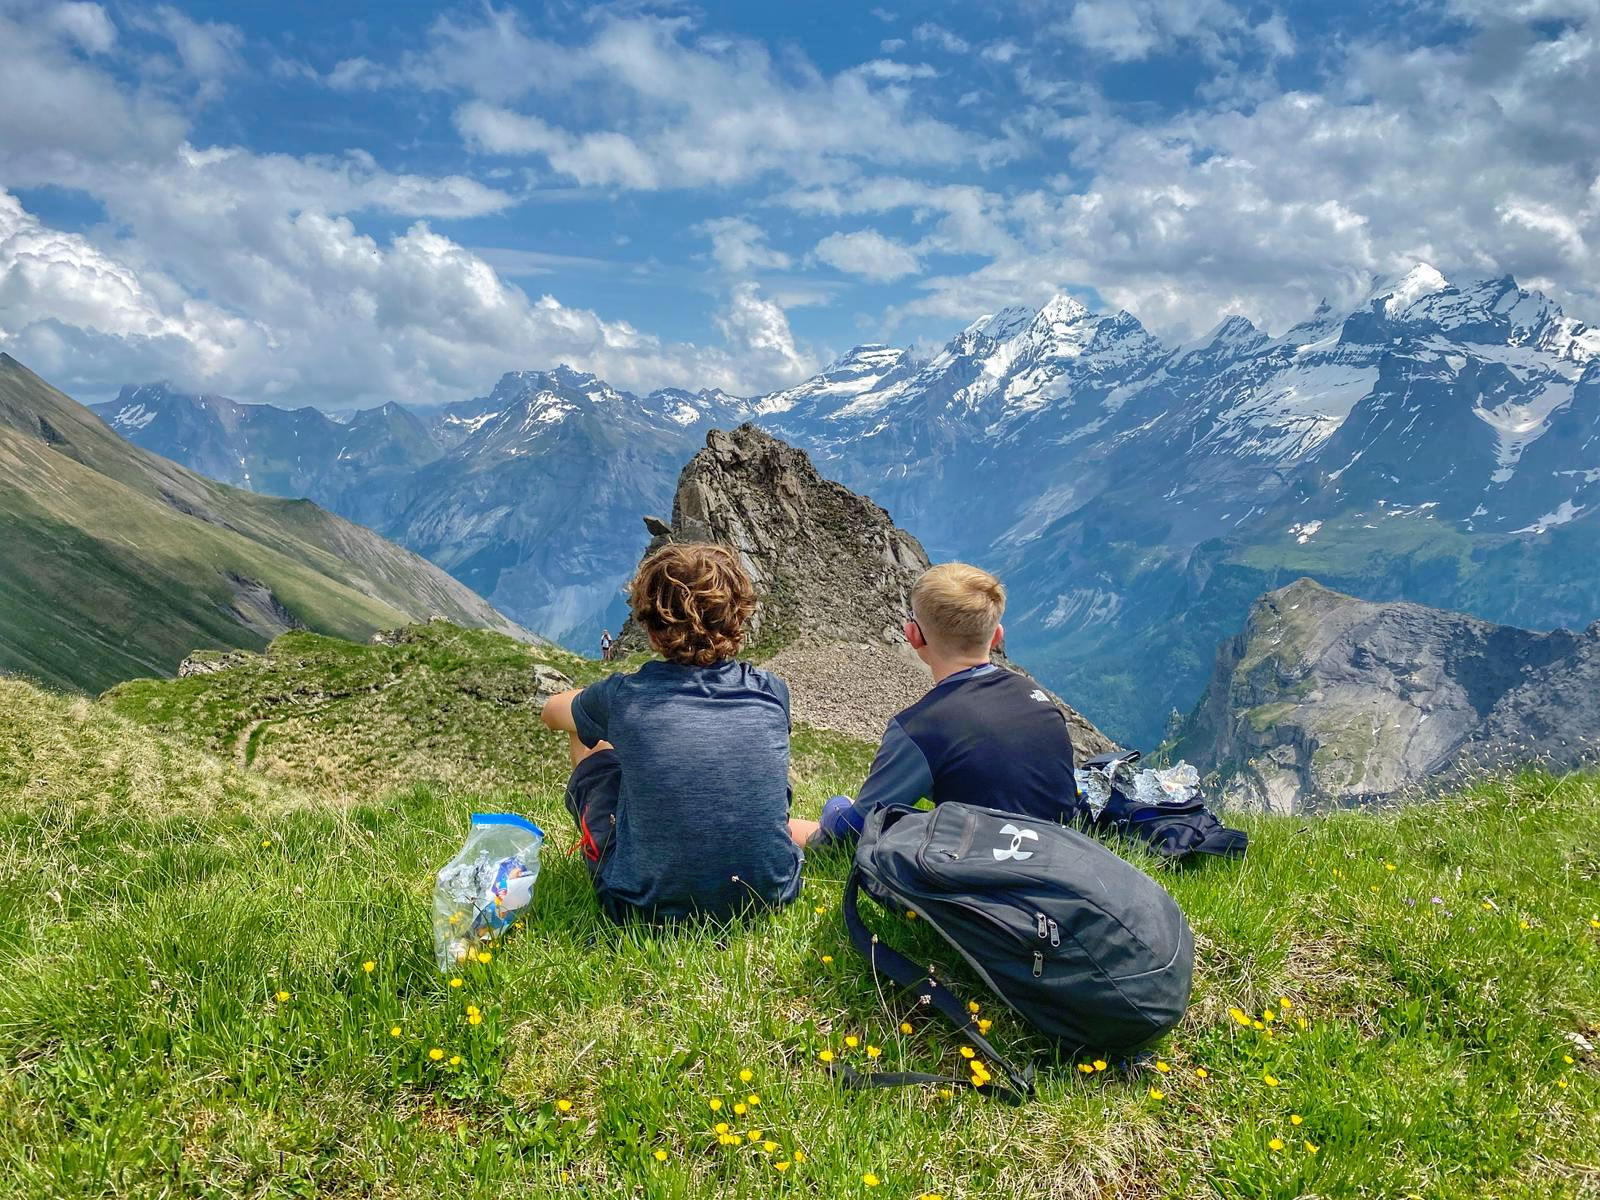 Students admire the view on the Alps trip